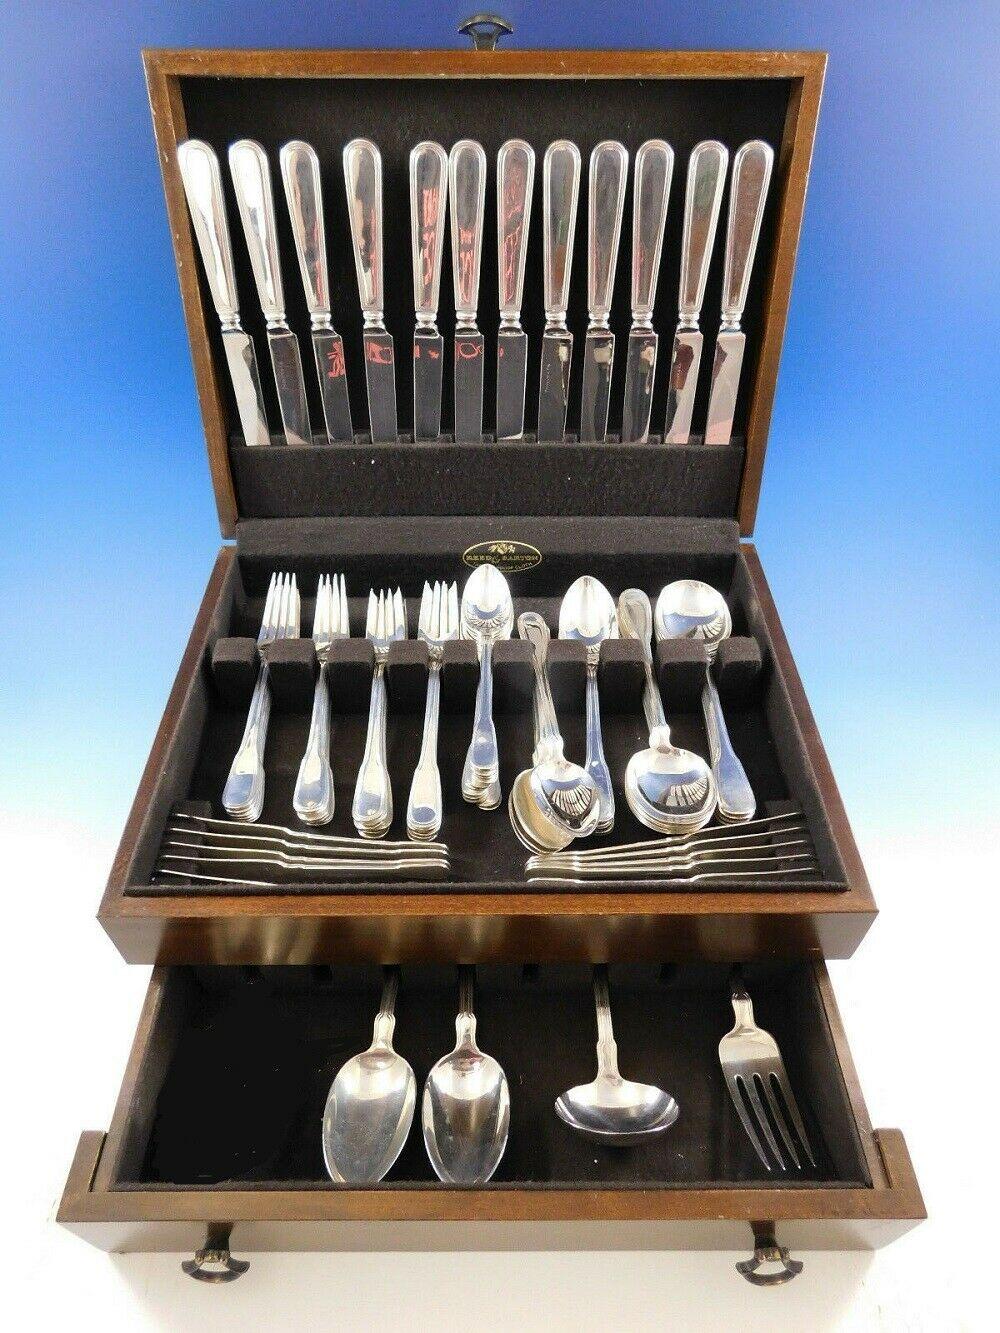 Stunning Hamilton by Tiffany & Co. sterling silver Flatware set, 88 pieces. This set includes:

12 regular luncheon size knives, 9 1/4